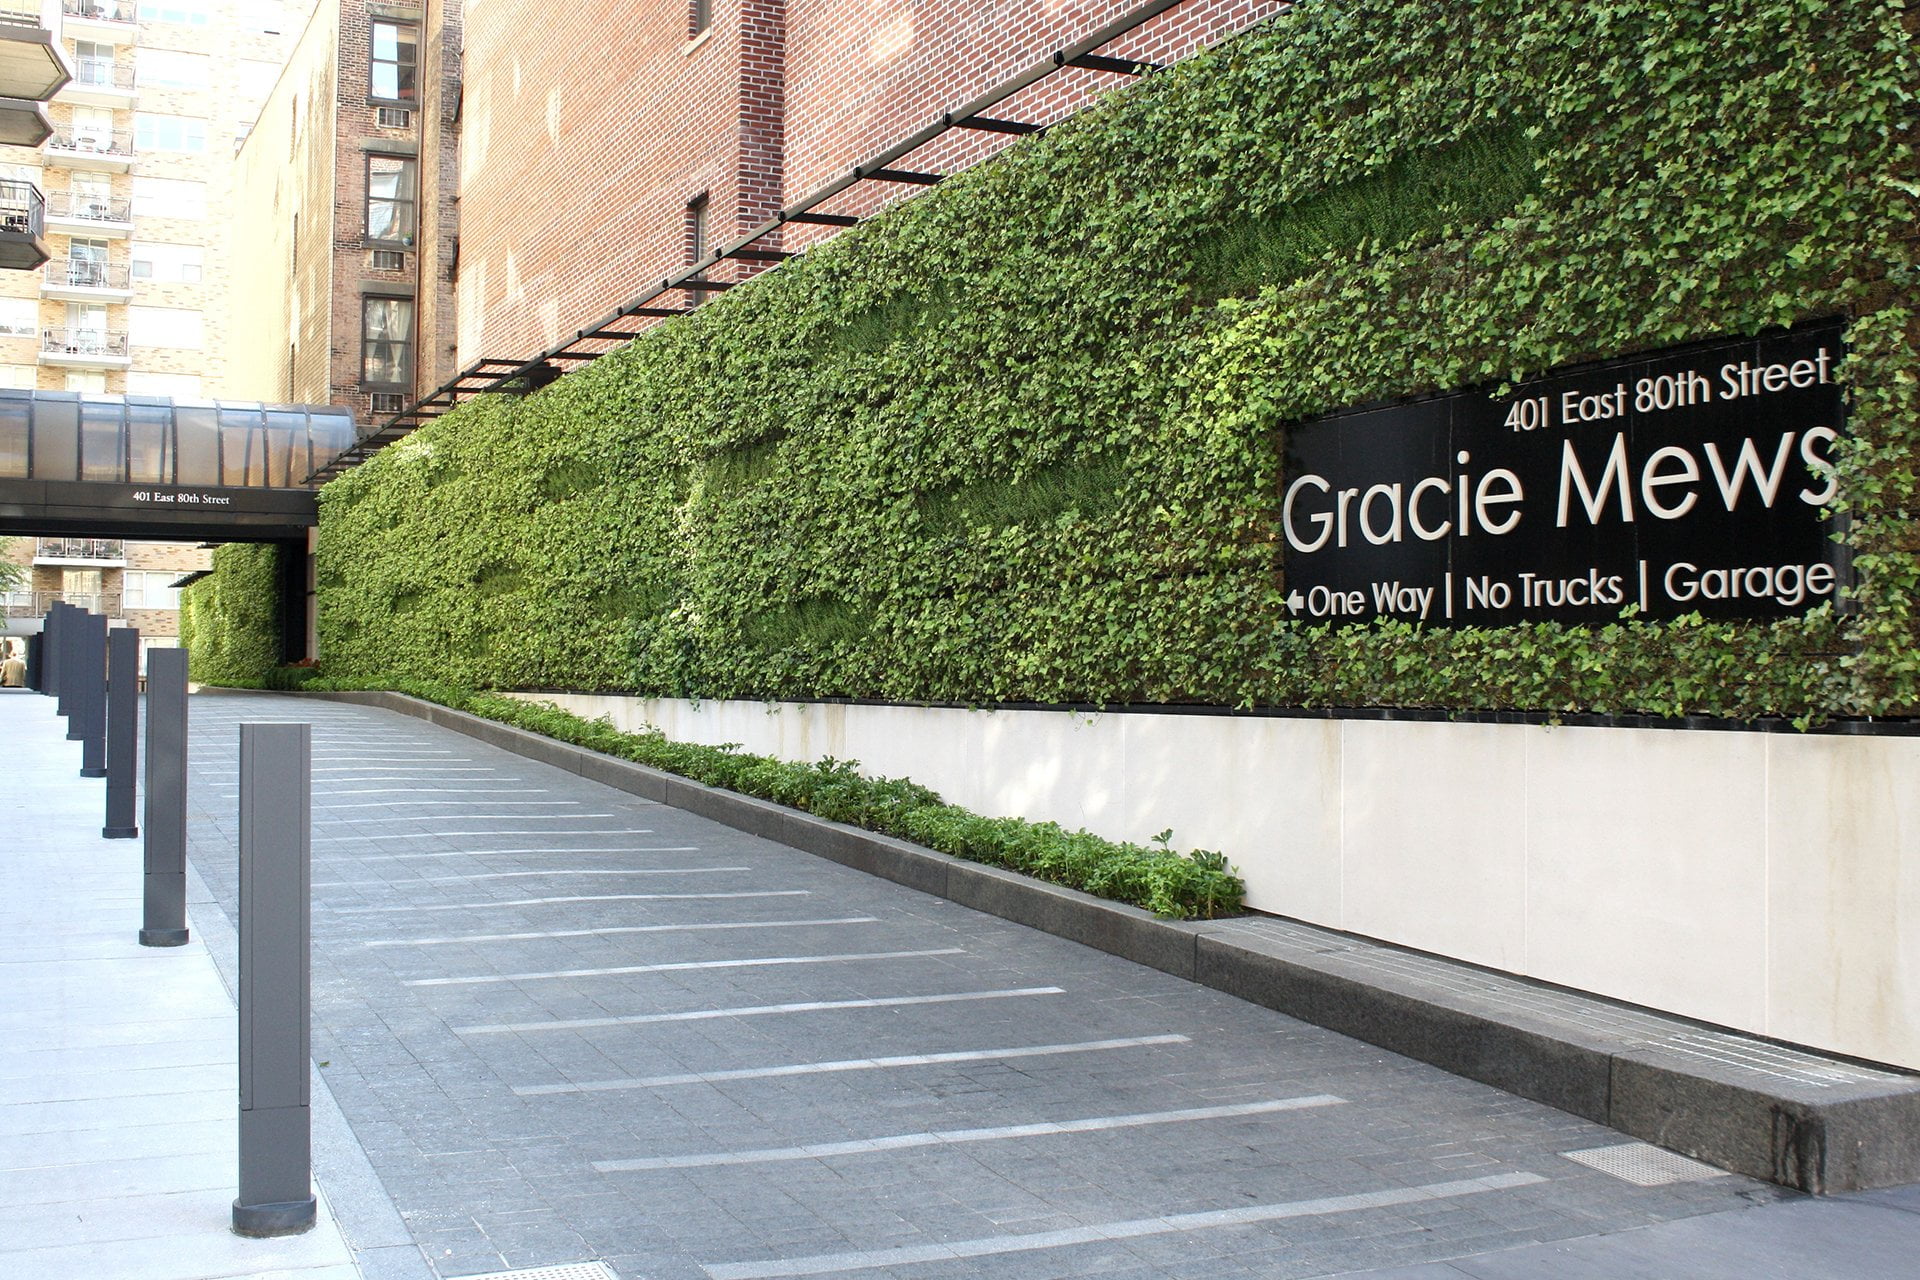 View of the drive and entryway at Gracie Mews building located at 401 East 80th Street